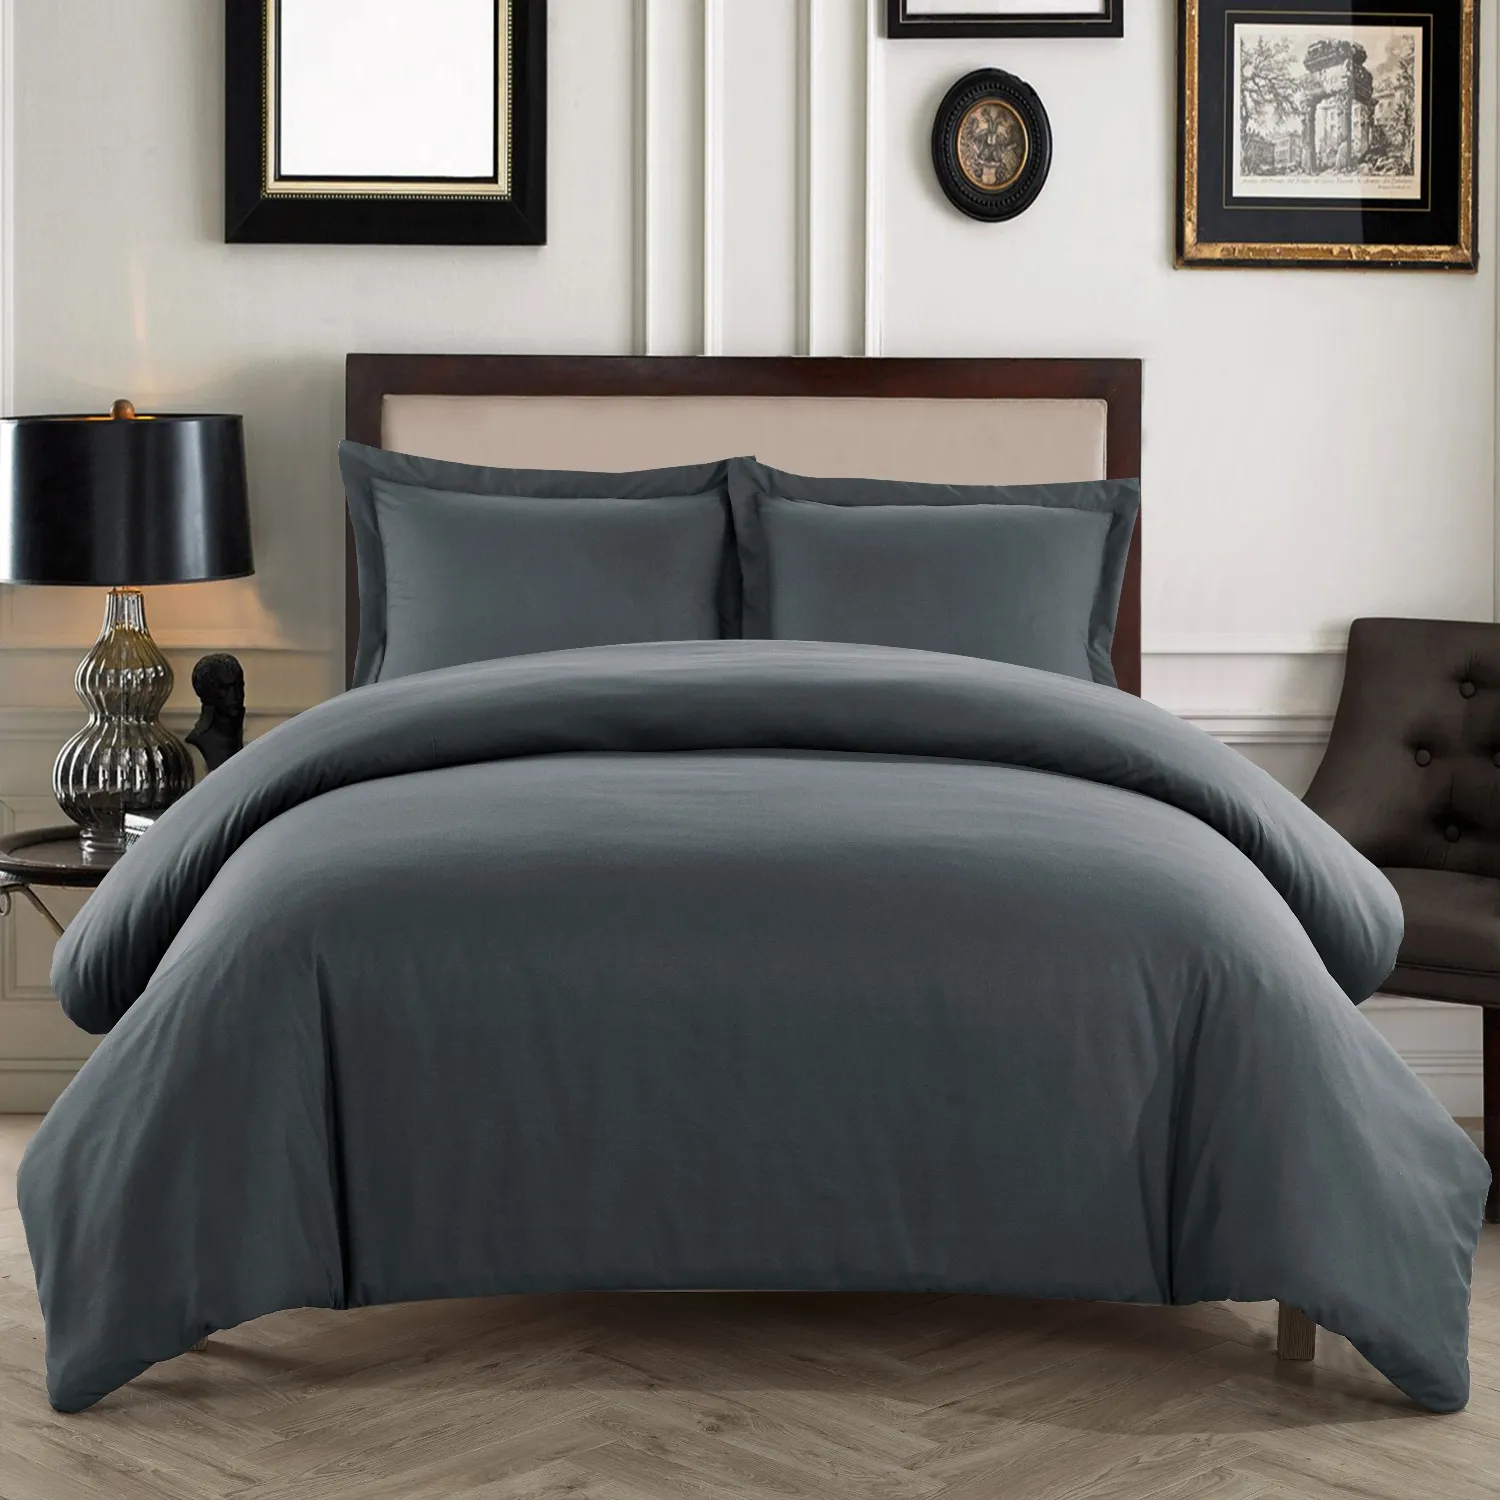 1800 Thread Count Duvet Cover Set, 3pc Luxury Soft, All Sizes & Colors, King Navy Blue